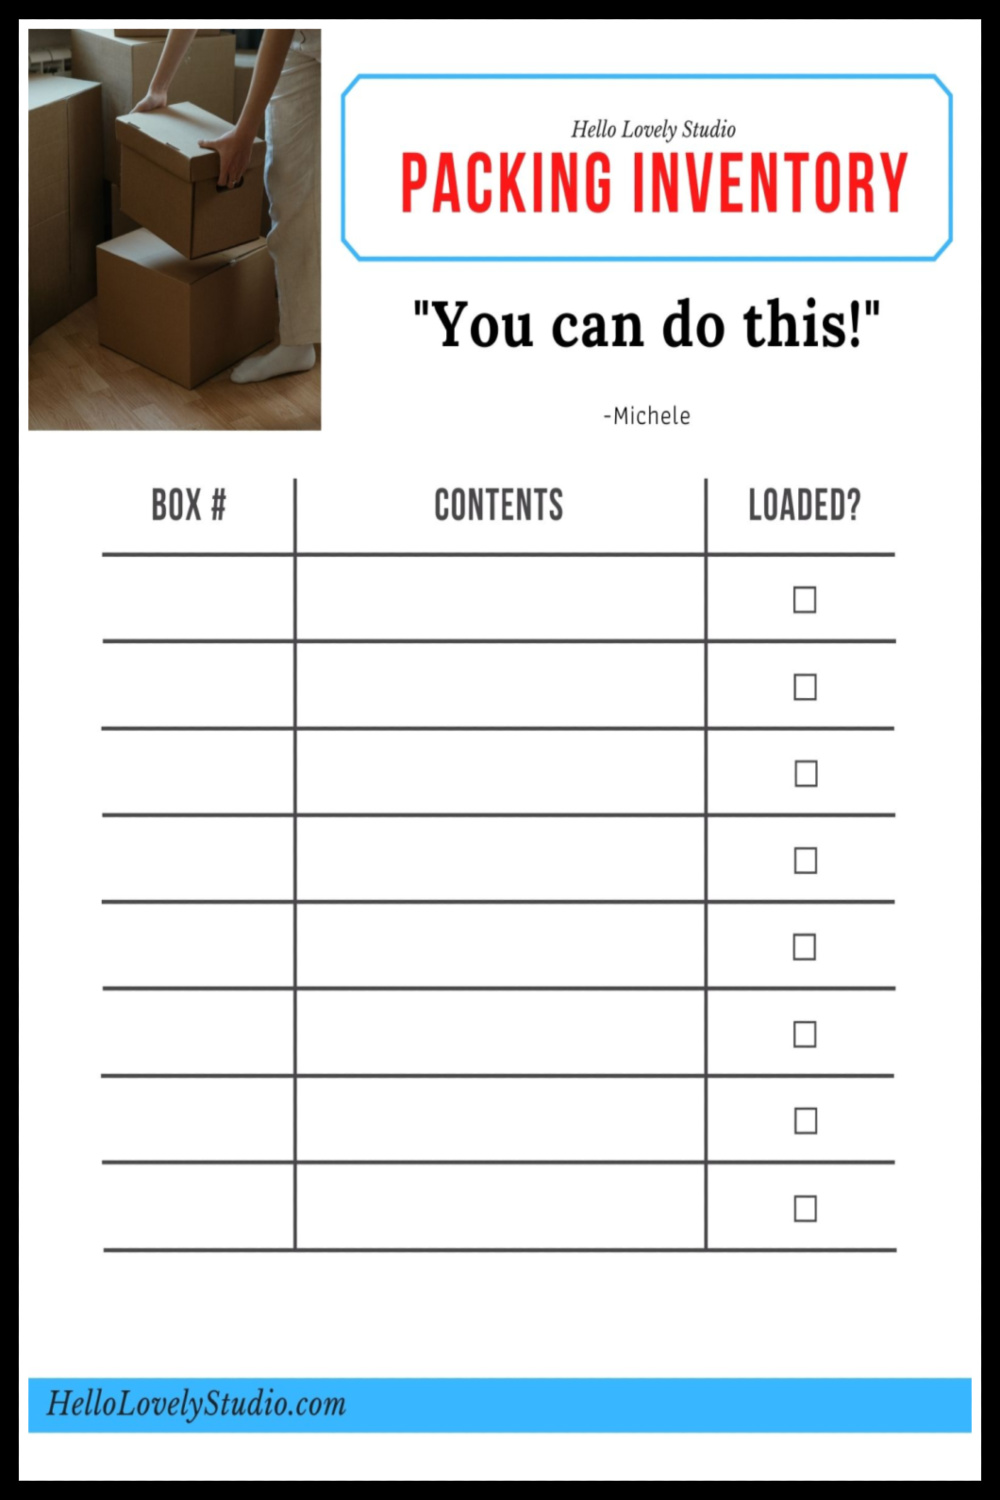 Packing Inventory form to list boxes, content, and loading info - a free printable with moving tips - Hello Lovely Studio. #packinginventory #moving #relocation #printable